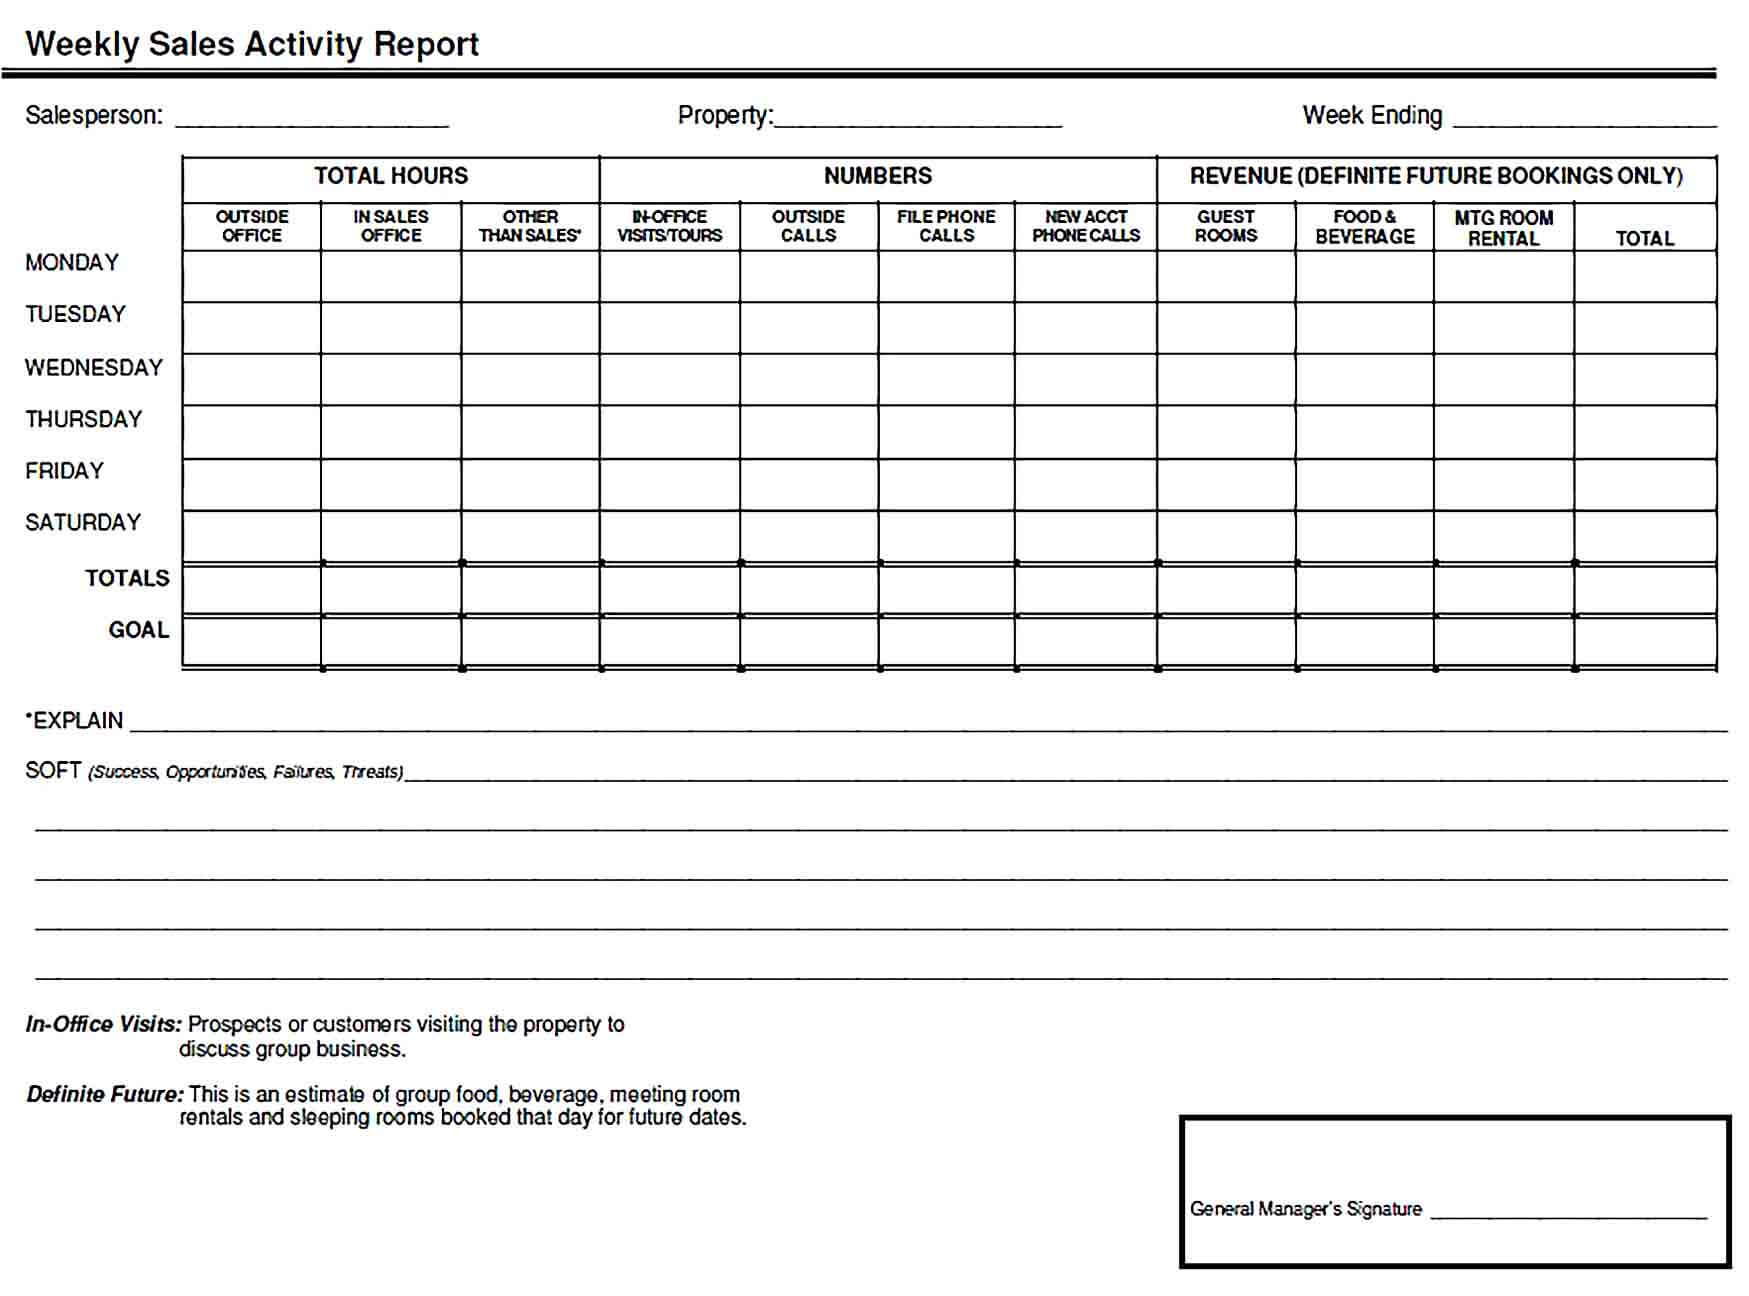 Sample Weekly Sales Activity Report Word Template